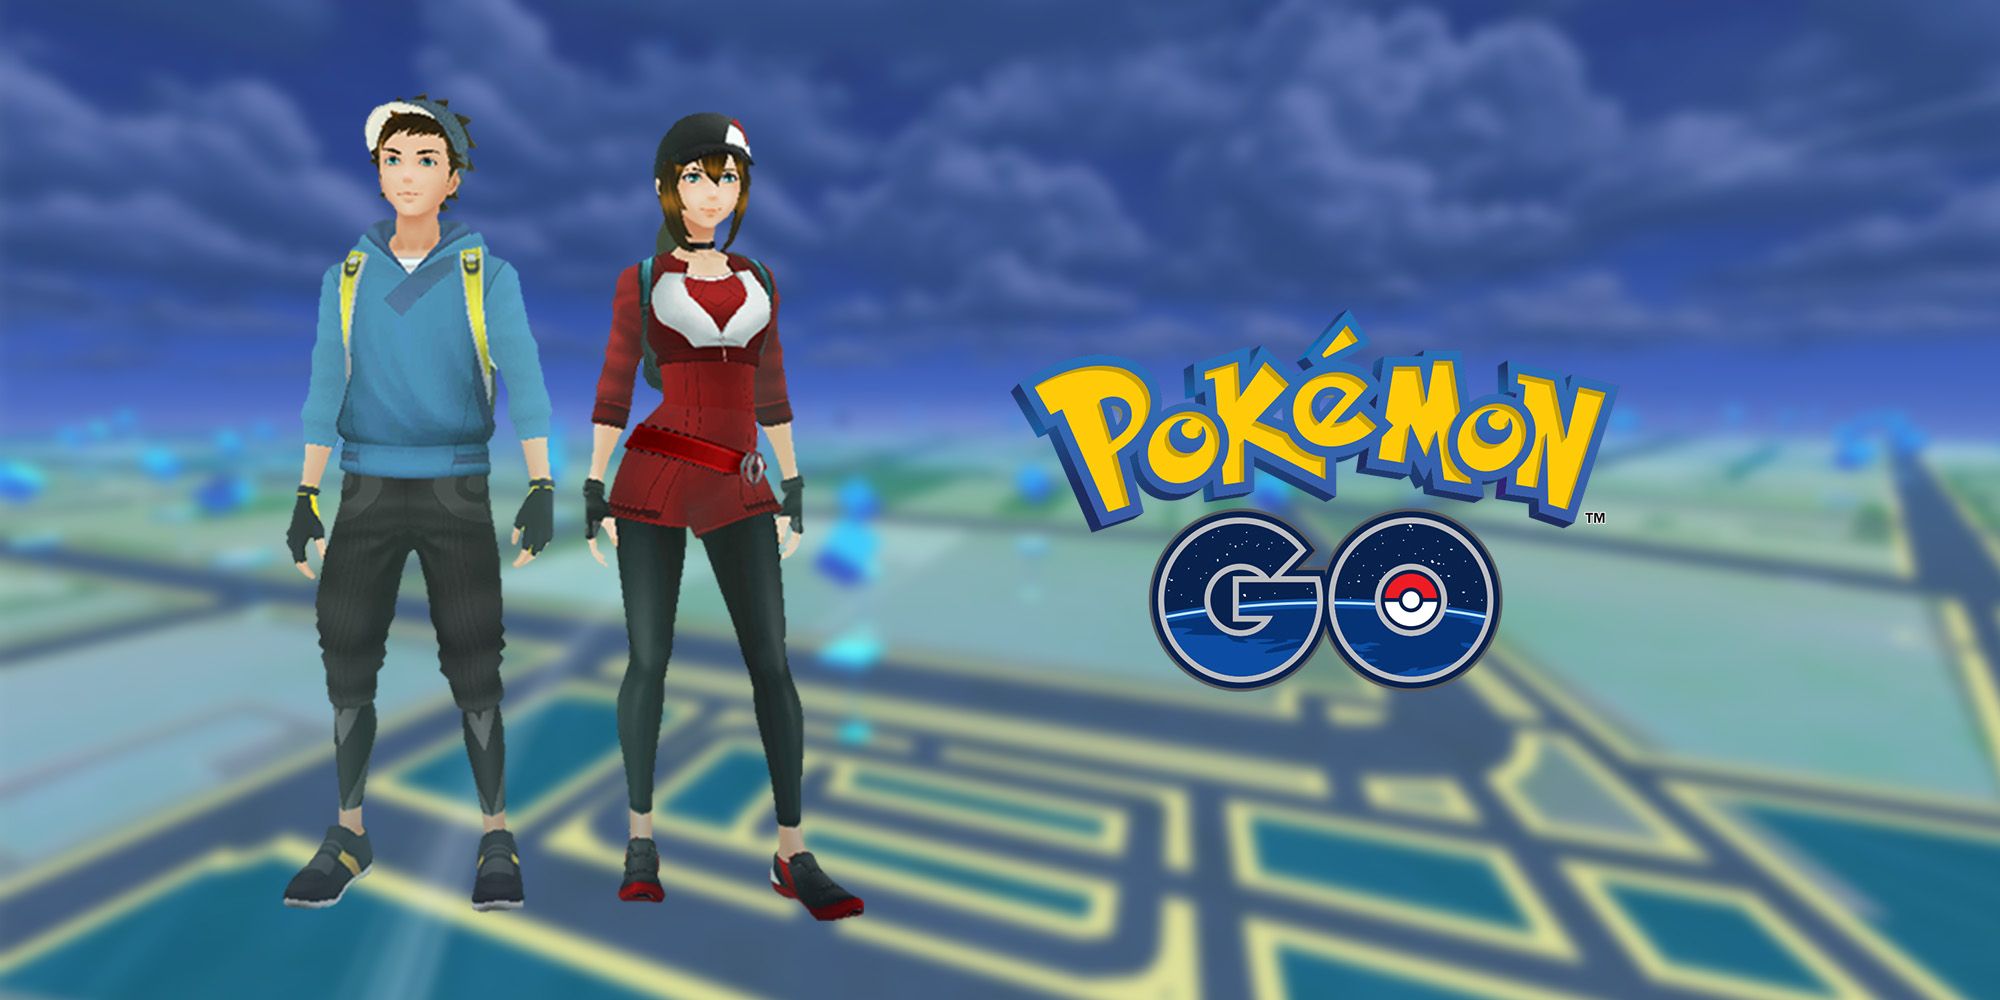 Generic Pokemon Go header showing trainers at night